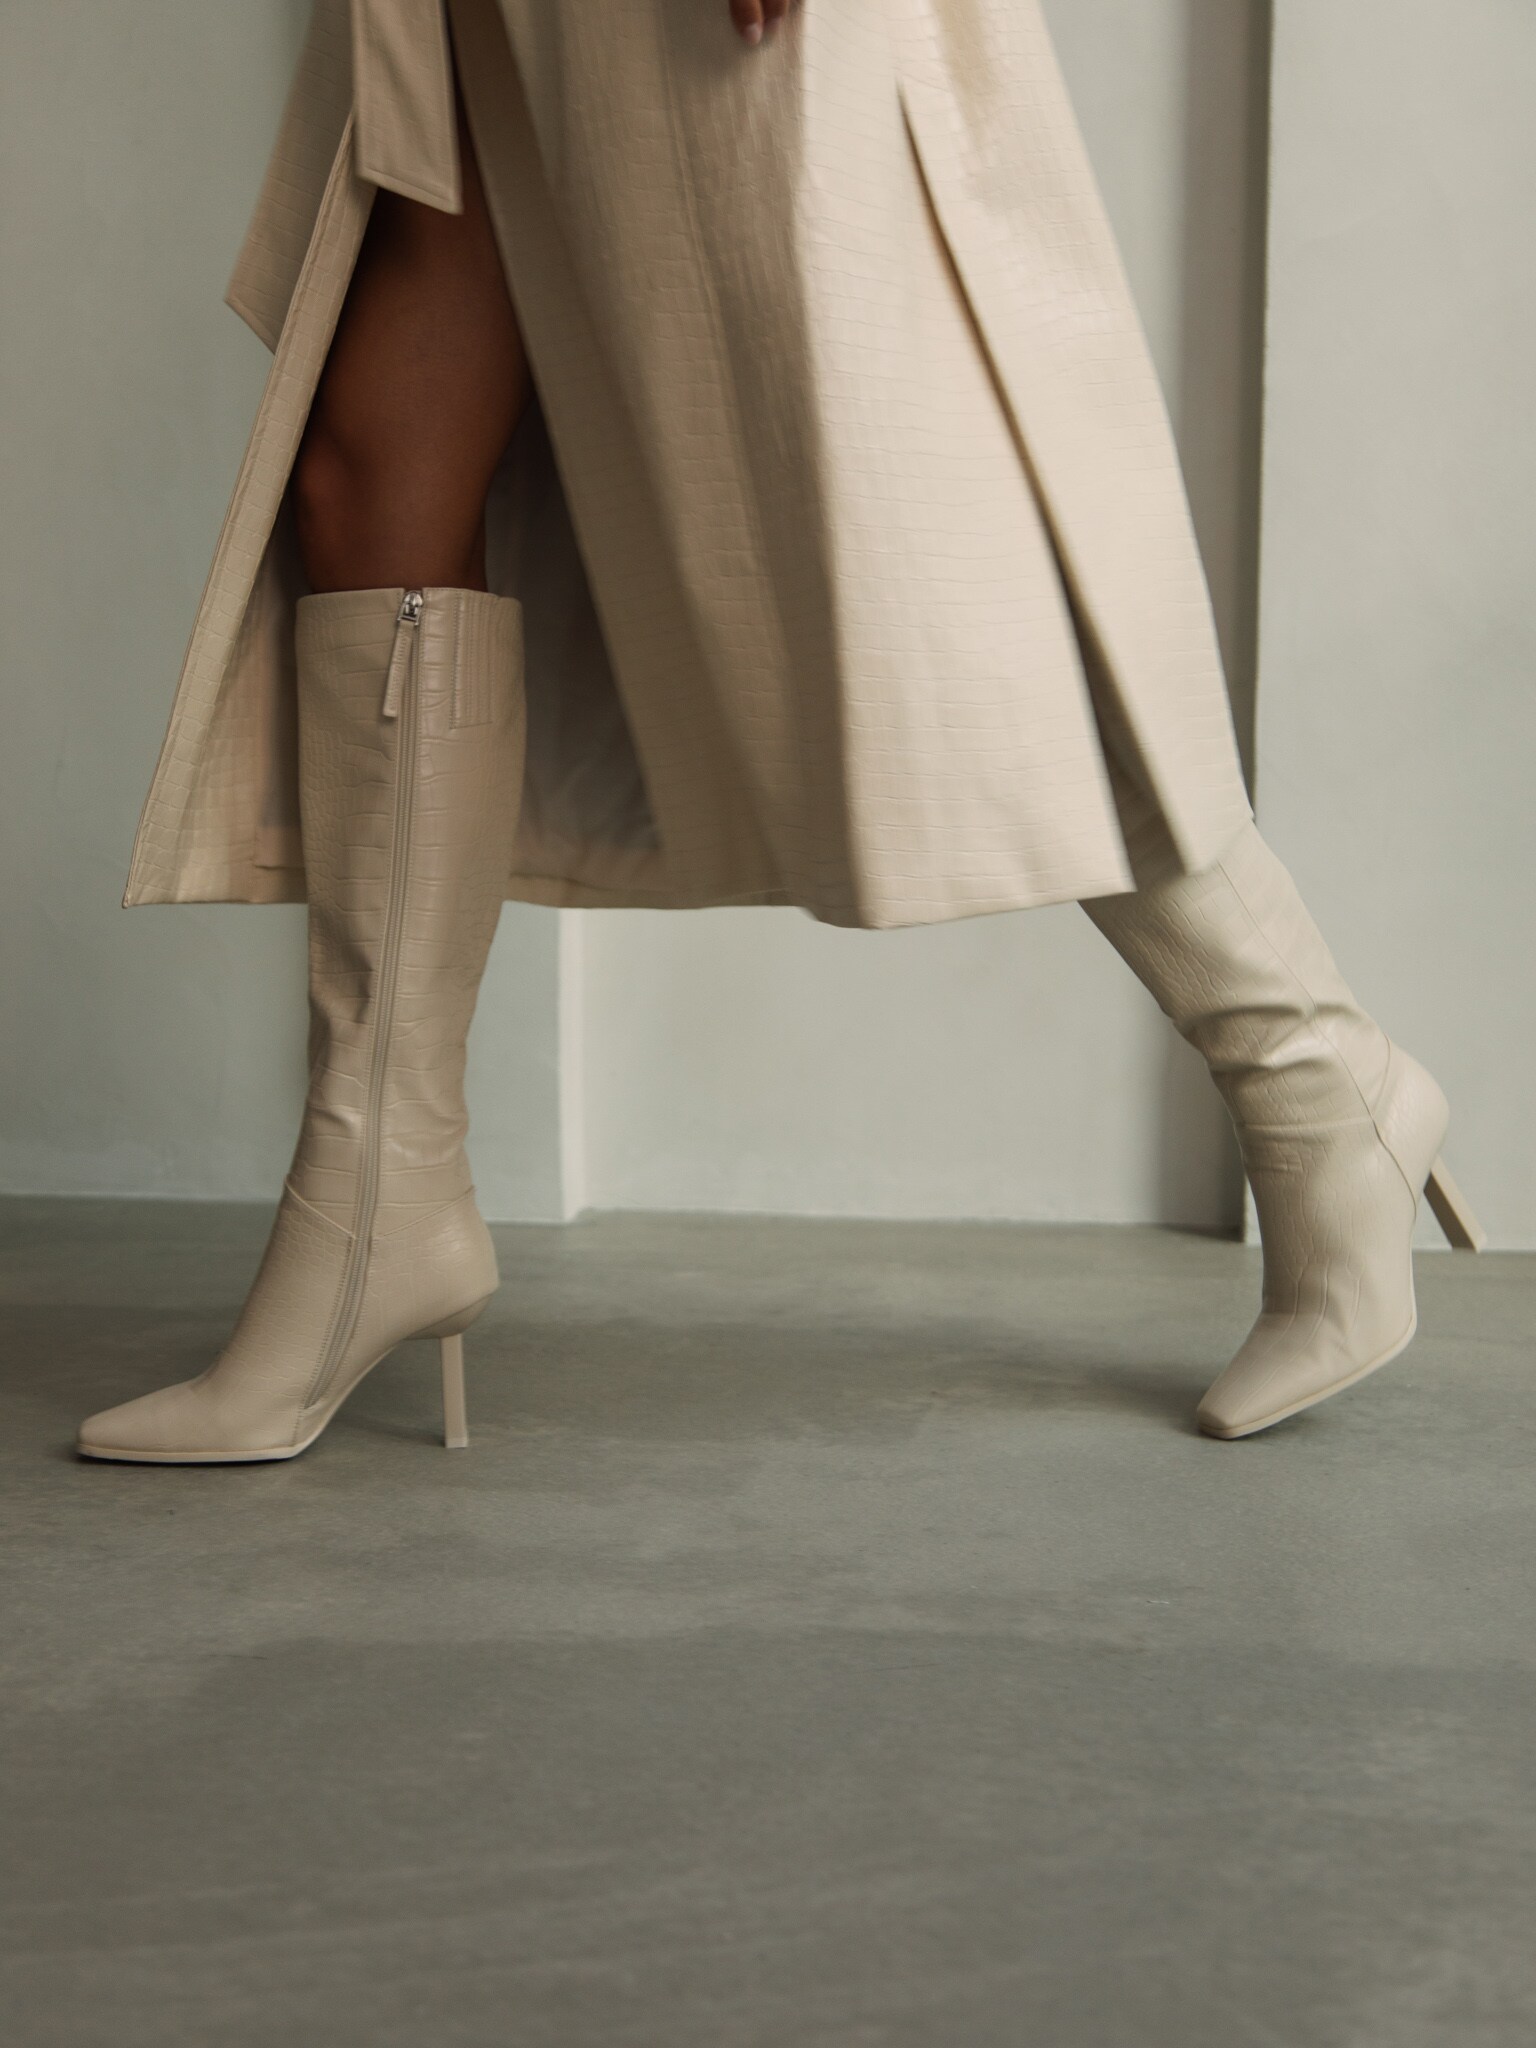 Platform boots with square toe :: LICHI - Online fashion store